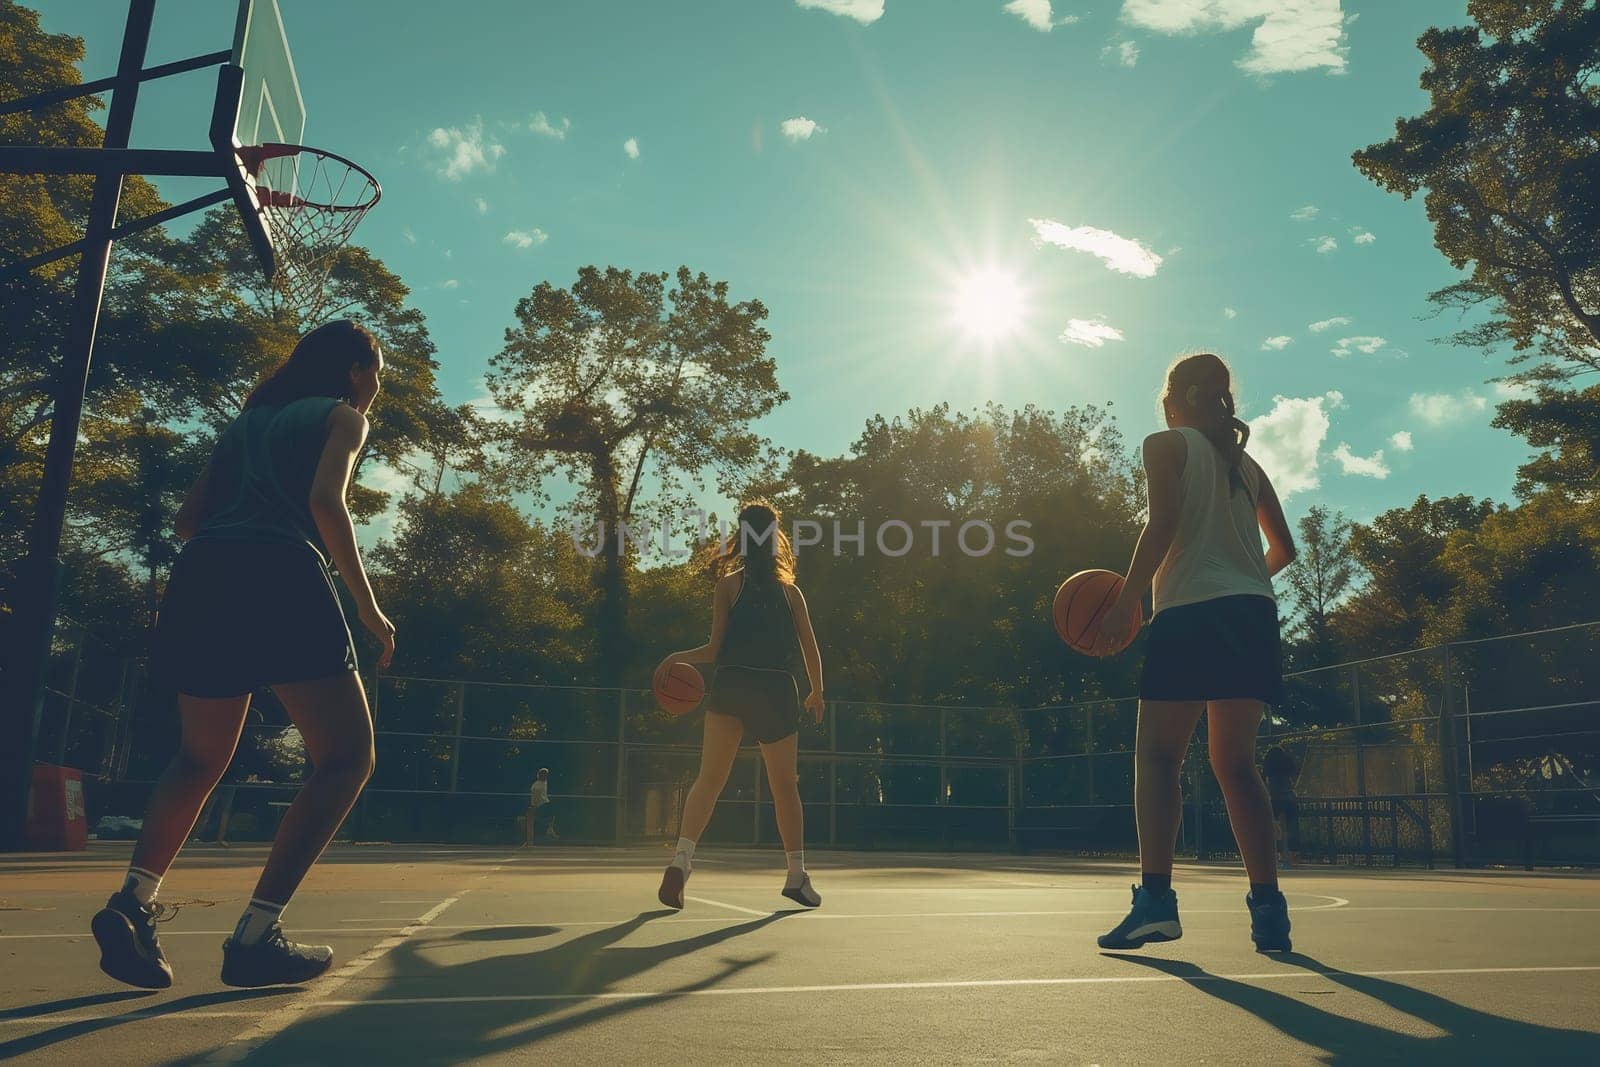 Players on Brower Park Basket Ball Court Enjoy a sunny late spring afternoon of basketball by Andelov13